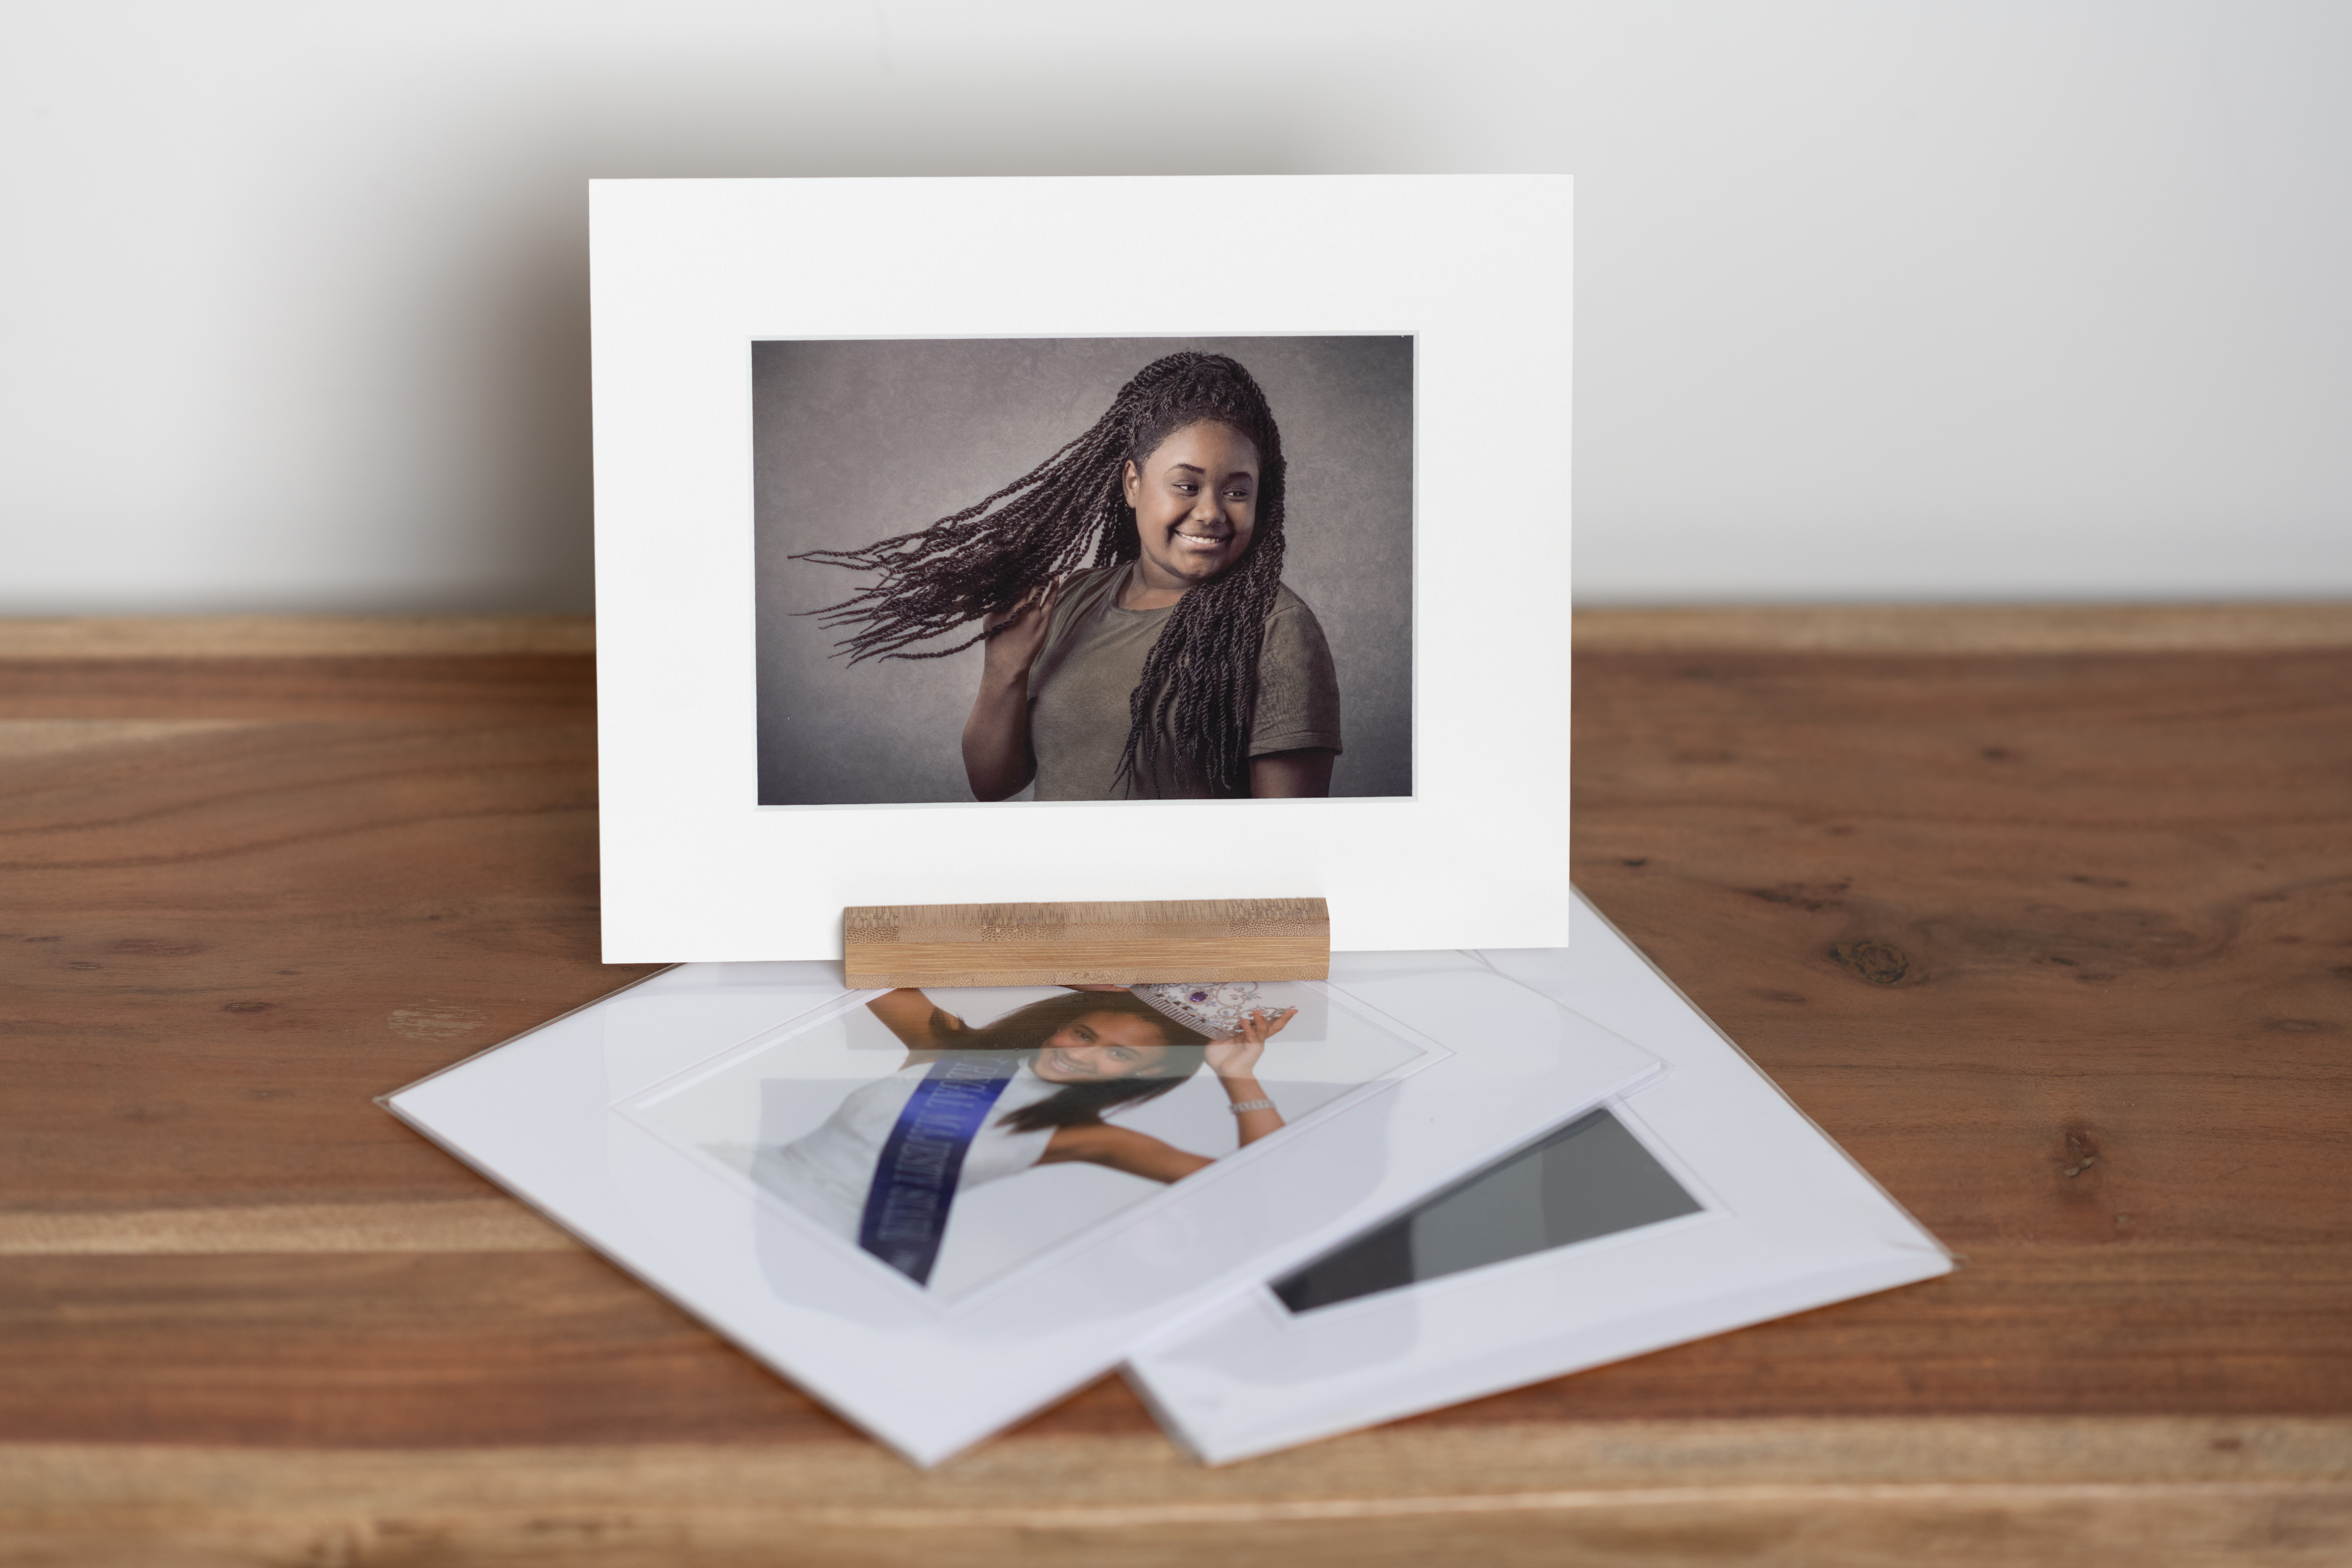 Matted gift photos displayed on wood table with white wall background.